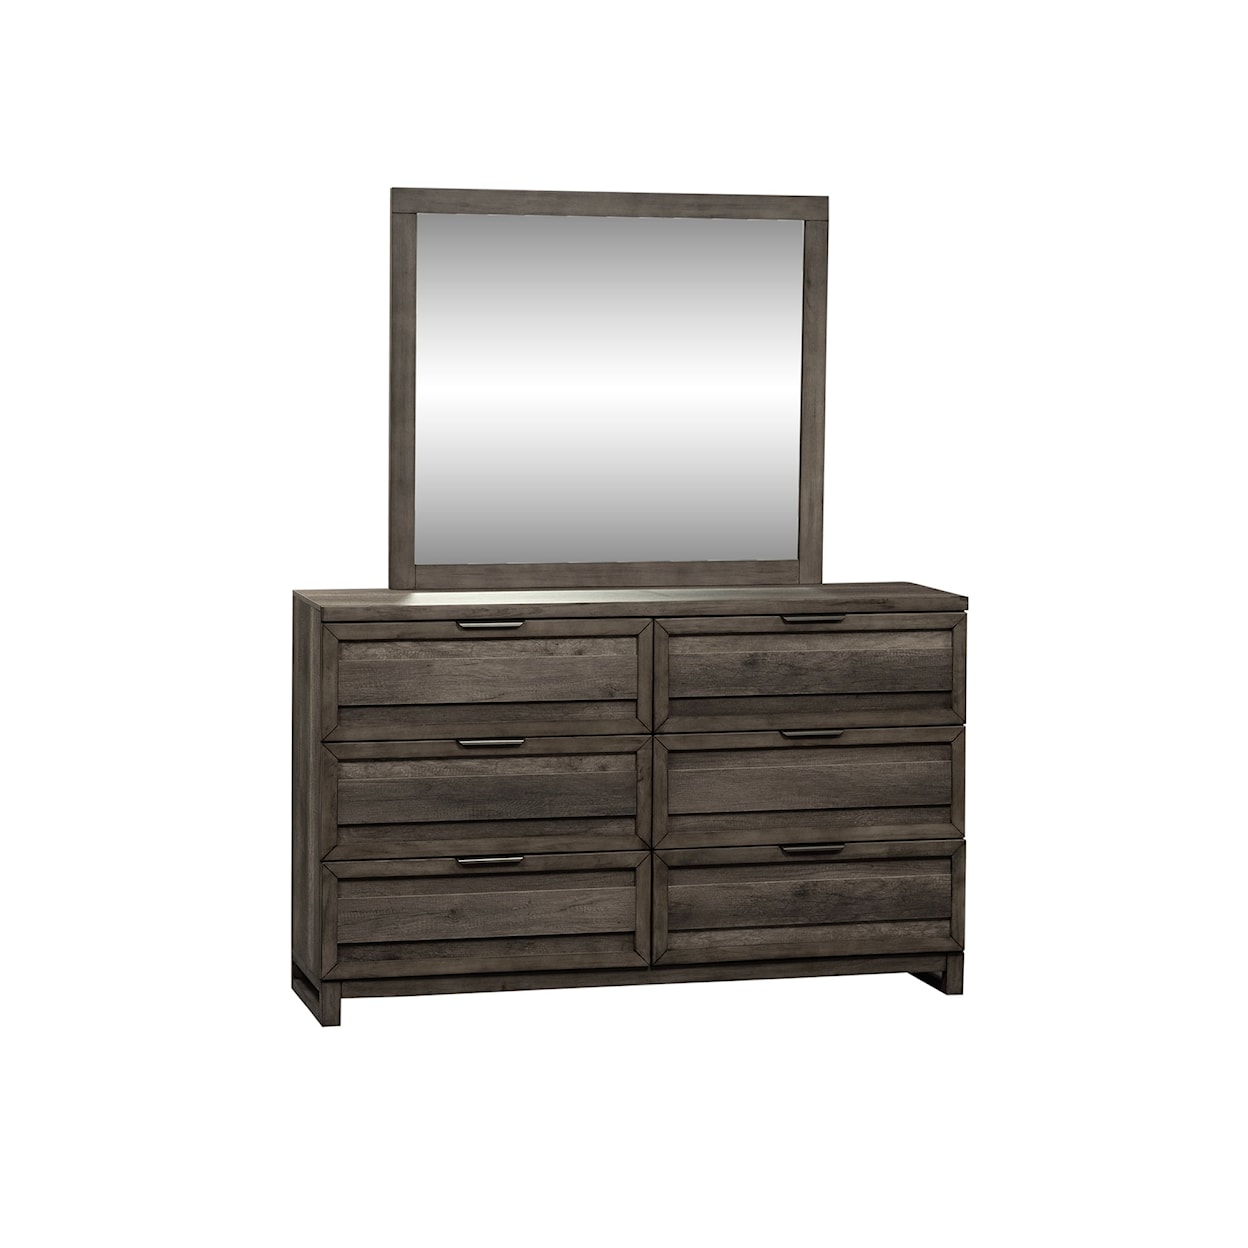 Libby Tanners Creek Dresser and Mirror